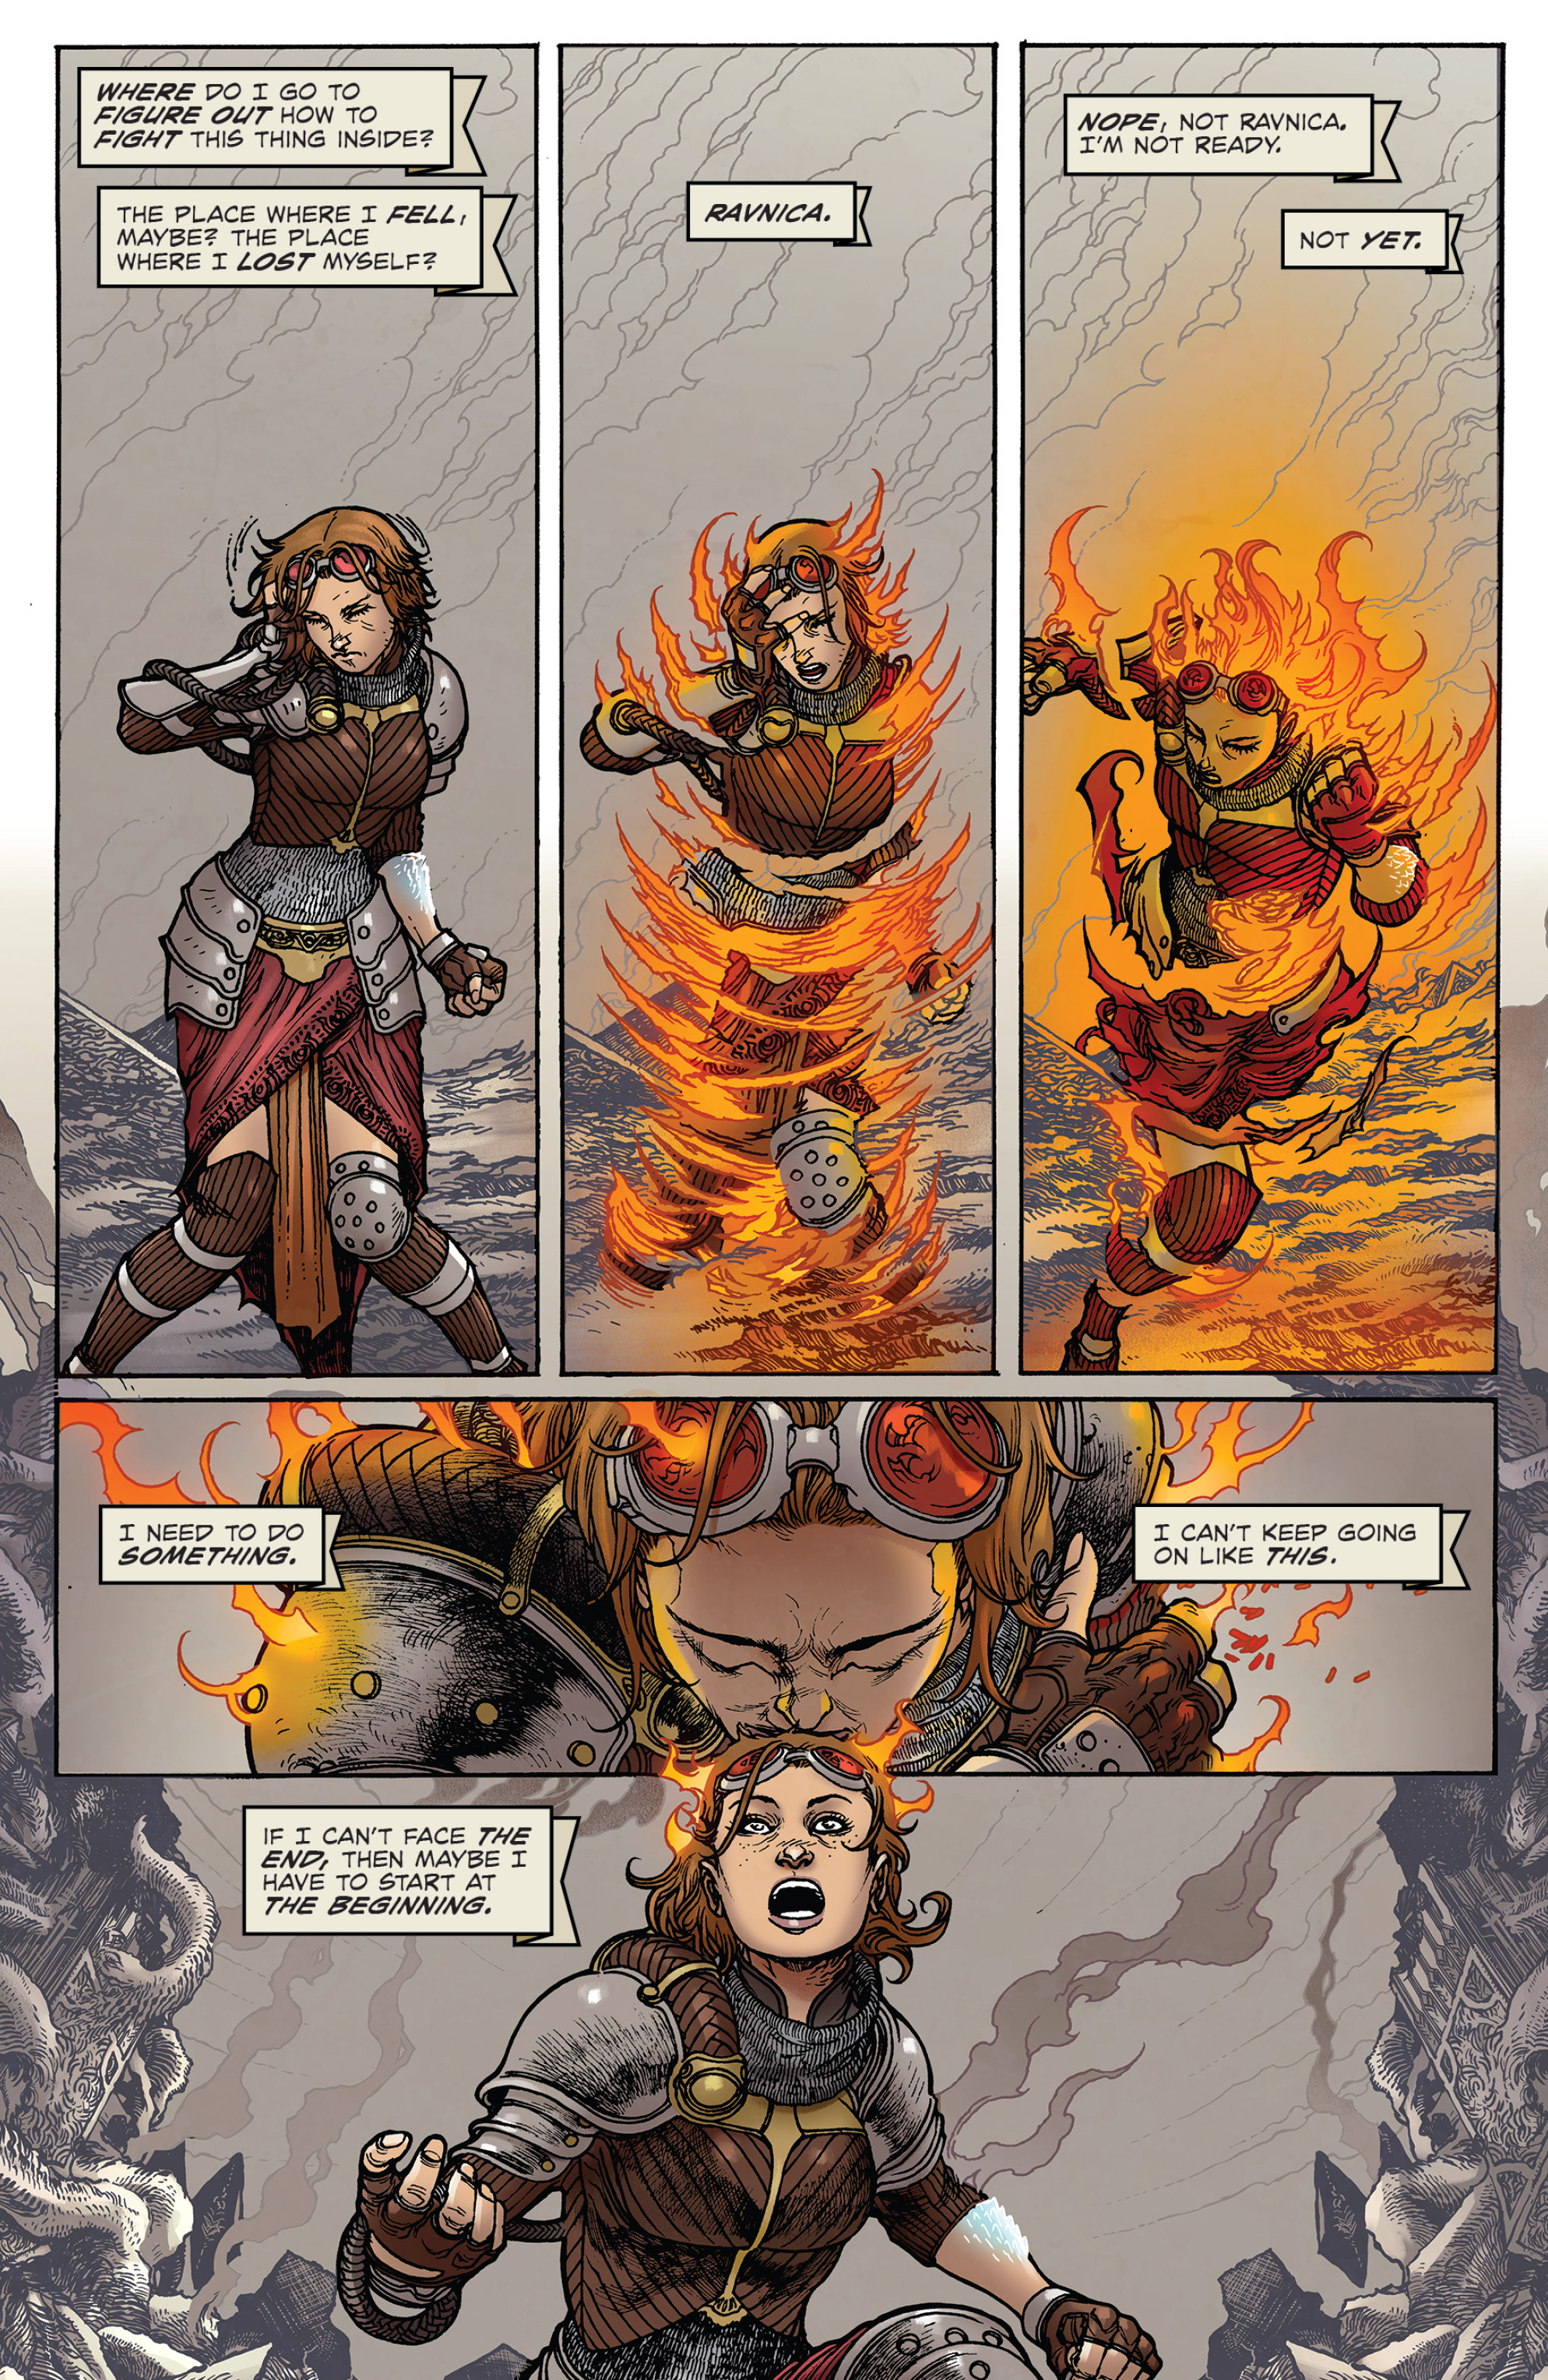 Magic: The Gathering: Chandra (2018-): Chapter 3 - Page 4